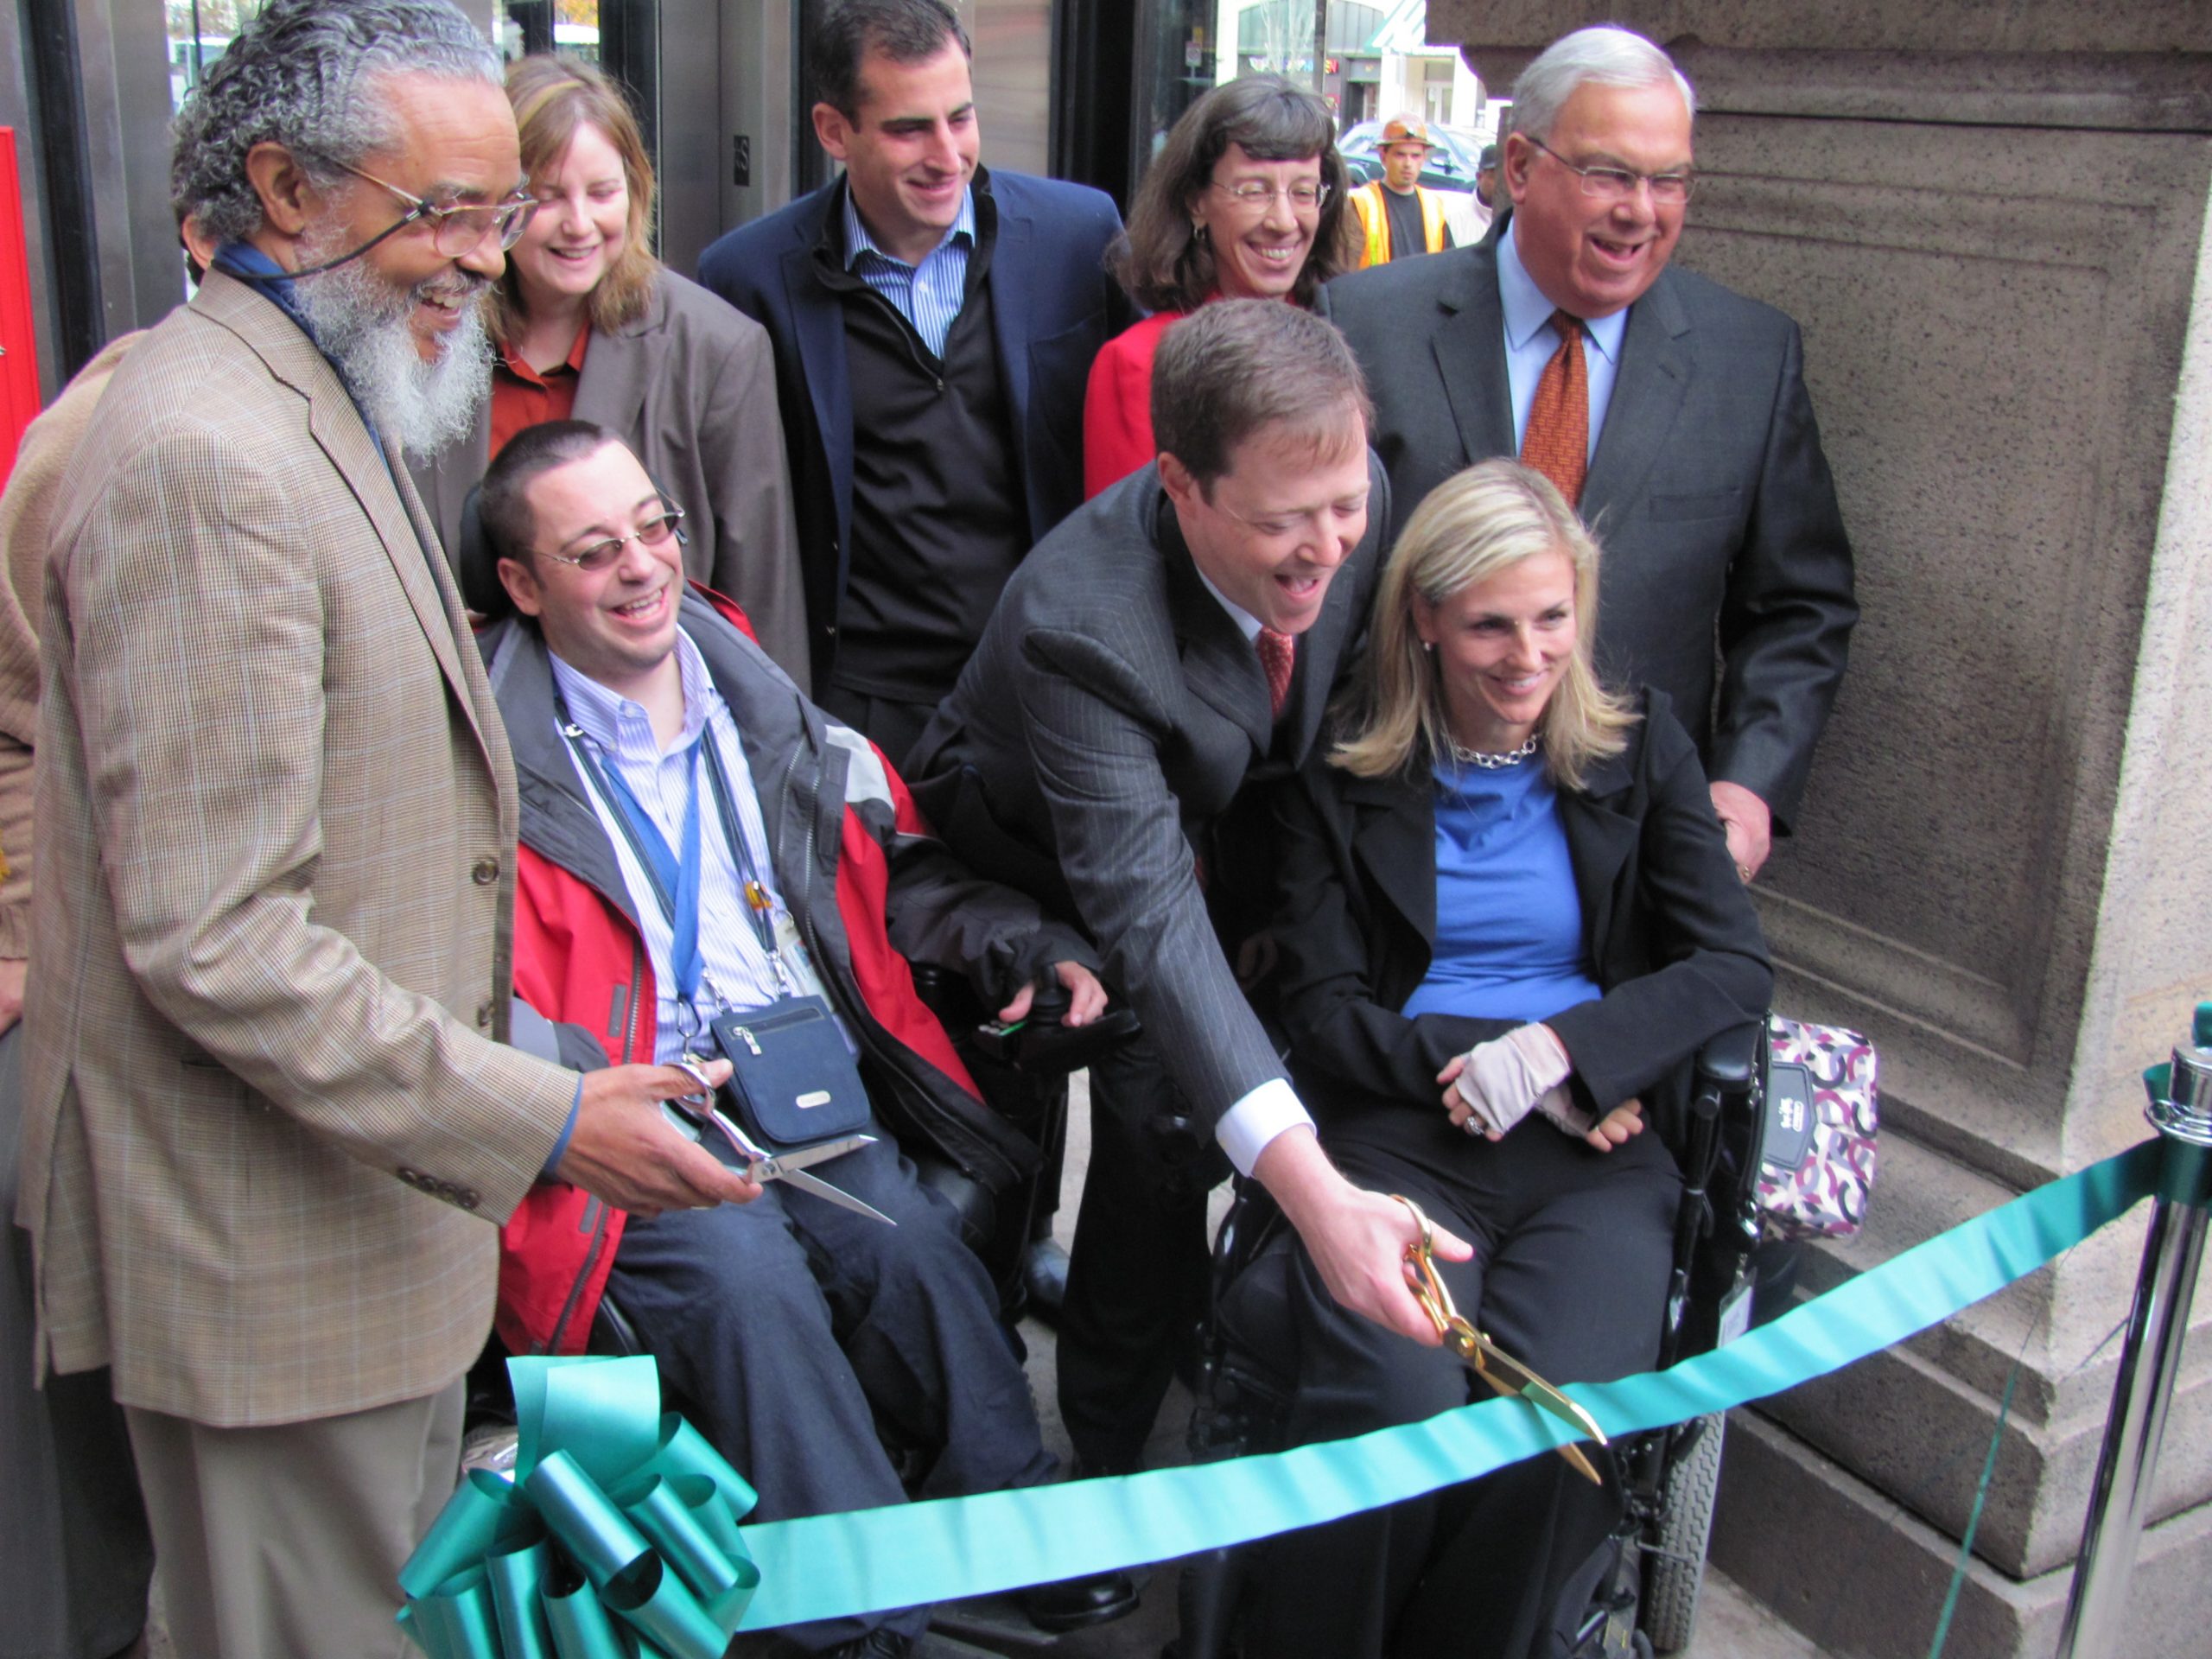 A group of predominantely white people at a ribbon cutting